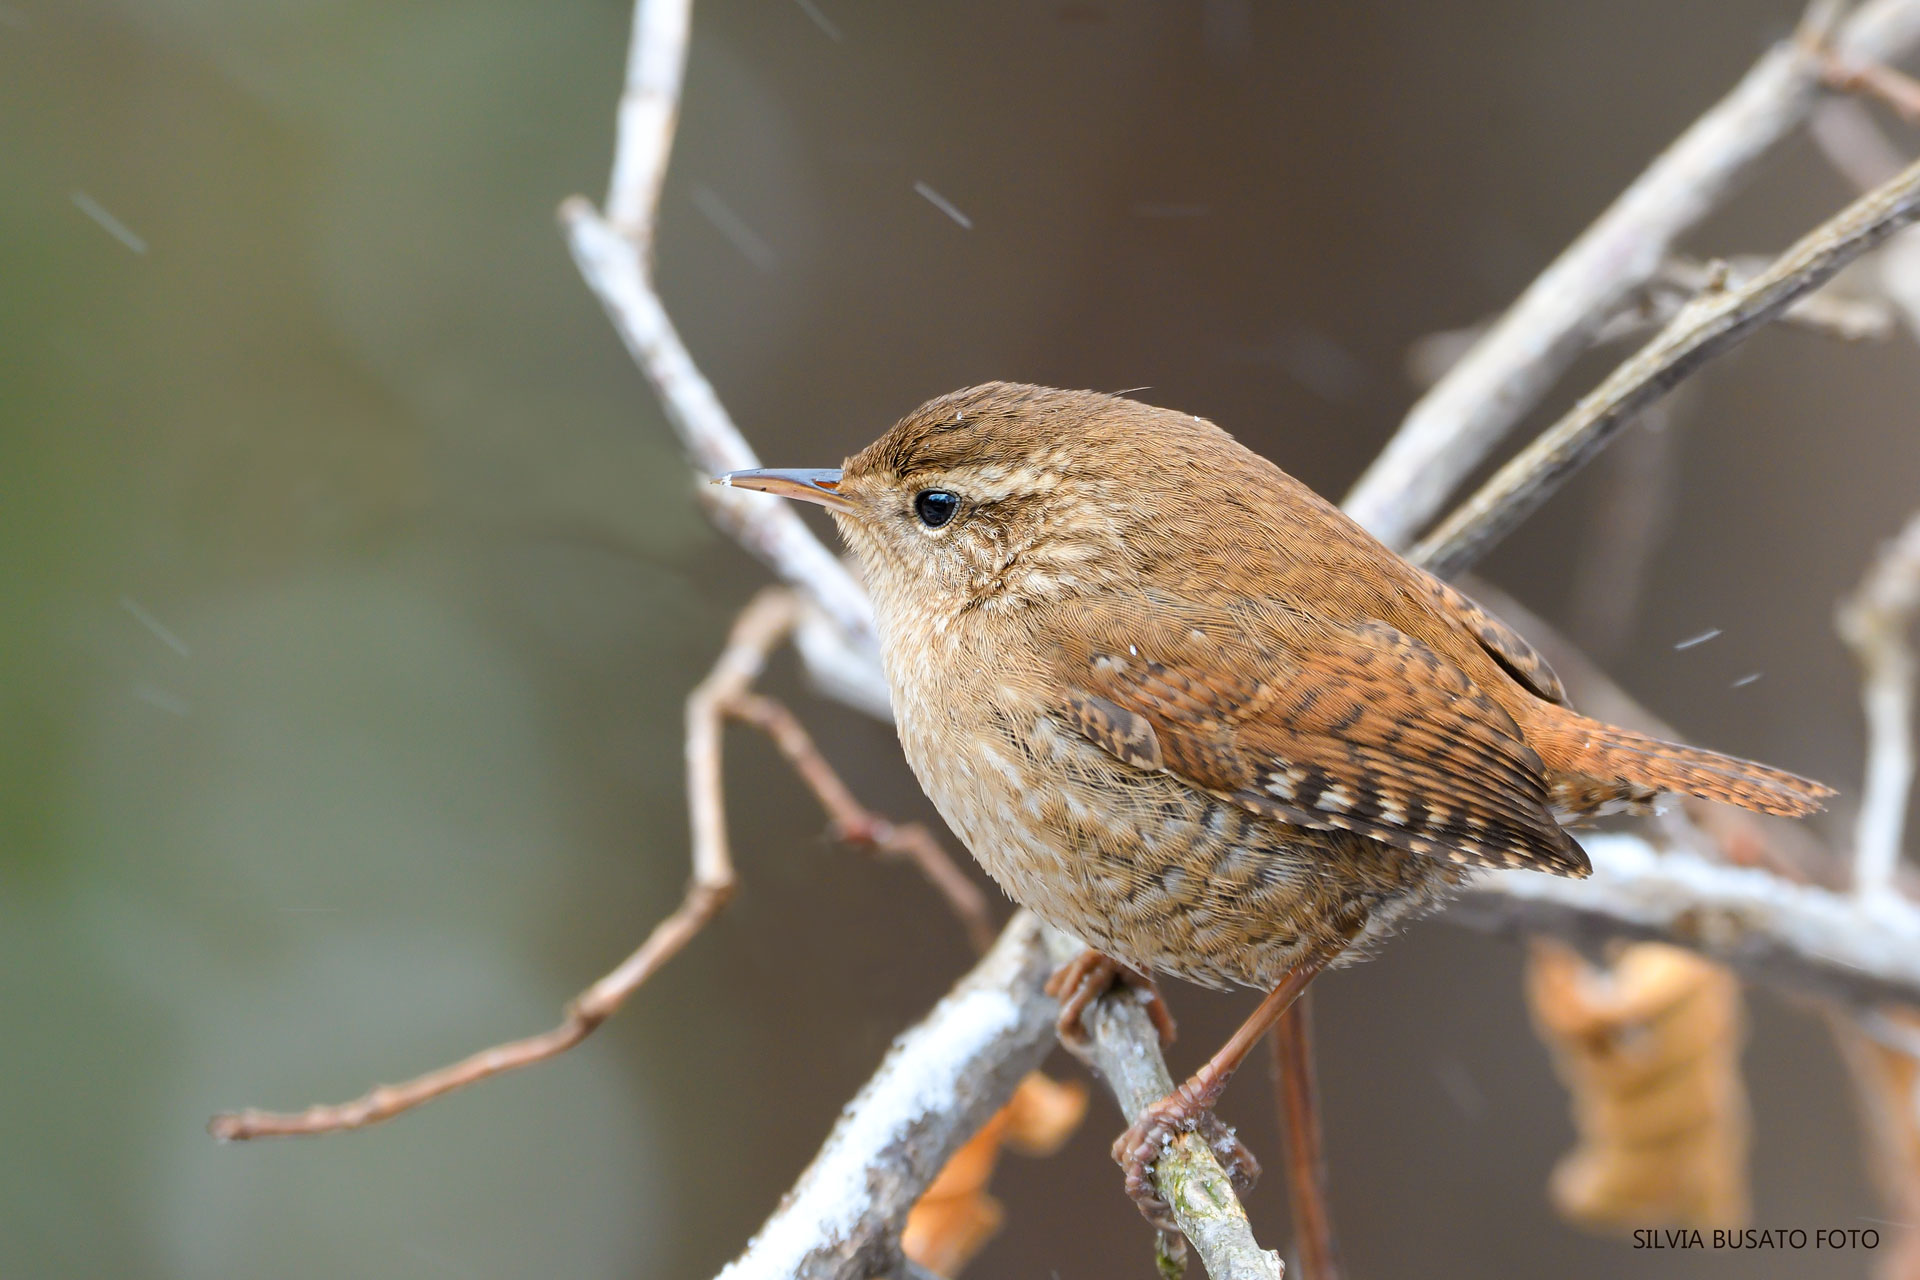 The wren and the snow...